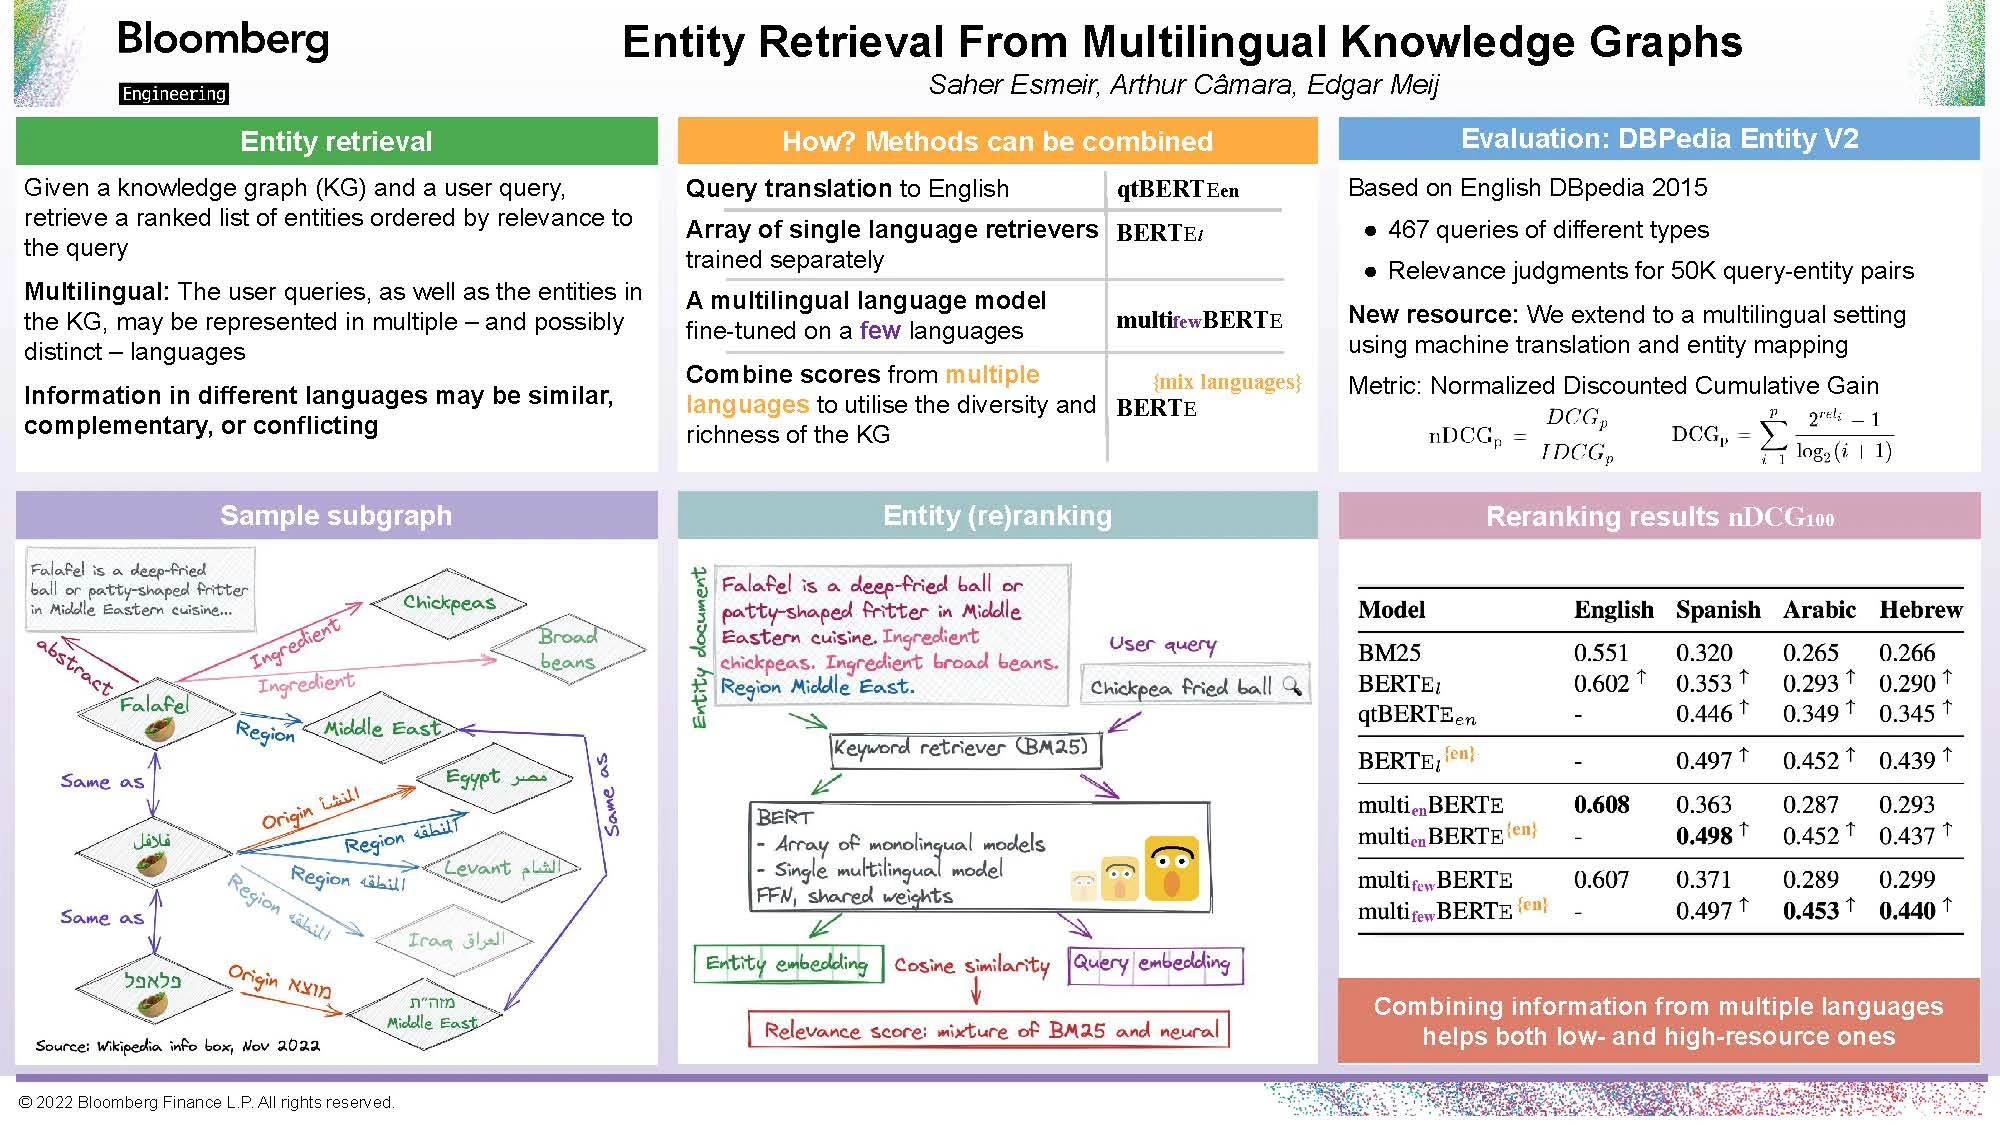 Image of the poster for the paper "Entity Retrieval from Multilingual Knowledge Graphs" that Saher Esmeir, Arthur Câmara & Edgar Meij are presenting during the poster session of the the 2nd Multilingual Representation Learning (MRL) Workshop at EMNLP 2022 on Thursday, December 8, 2022.